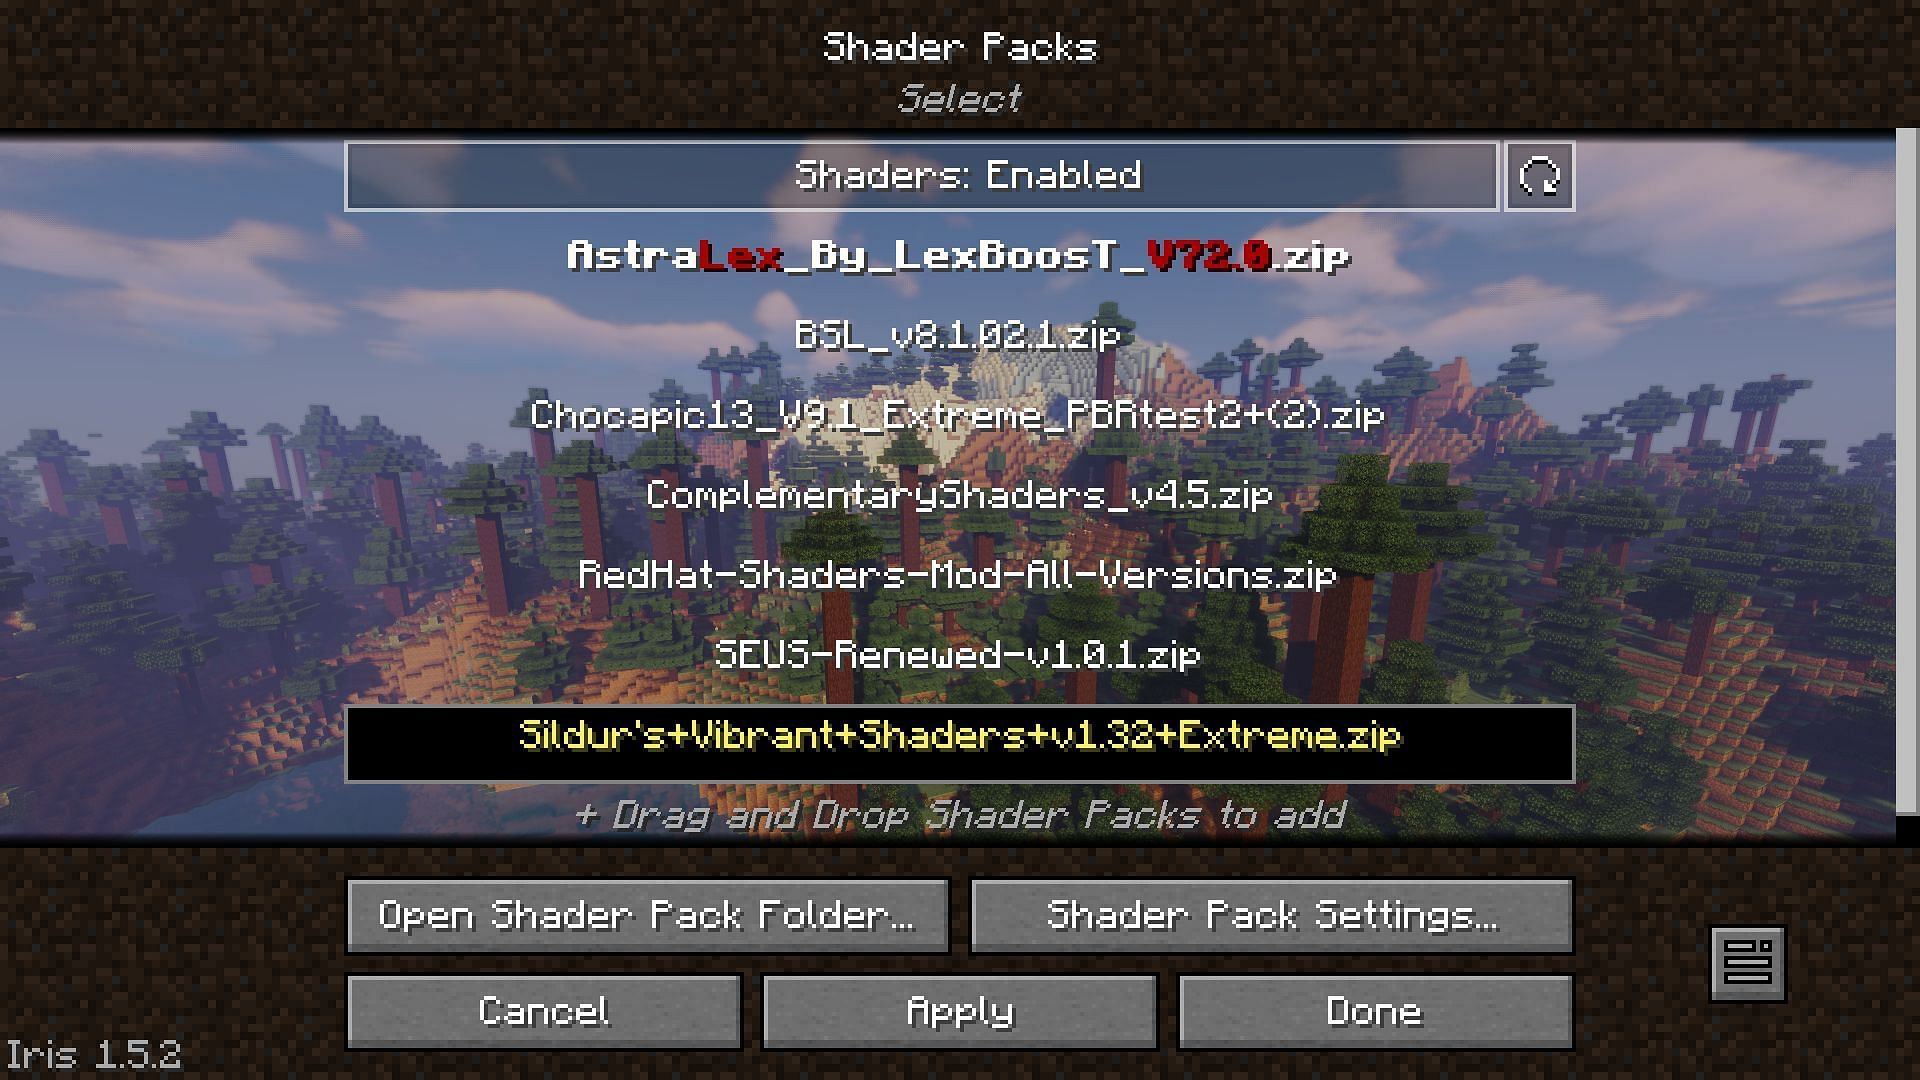 Open shader pack folder by going into the shader pack option in Minecraft 1.19.4 (Image via Mojang)